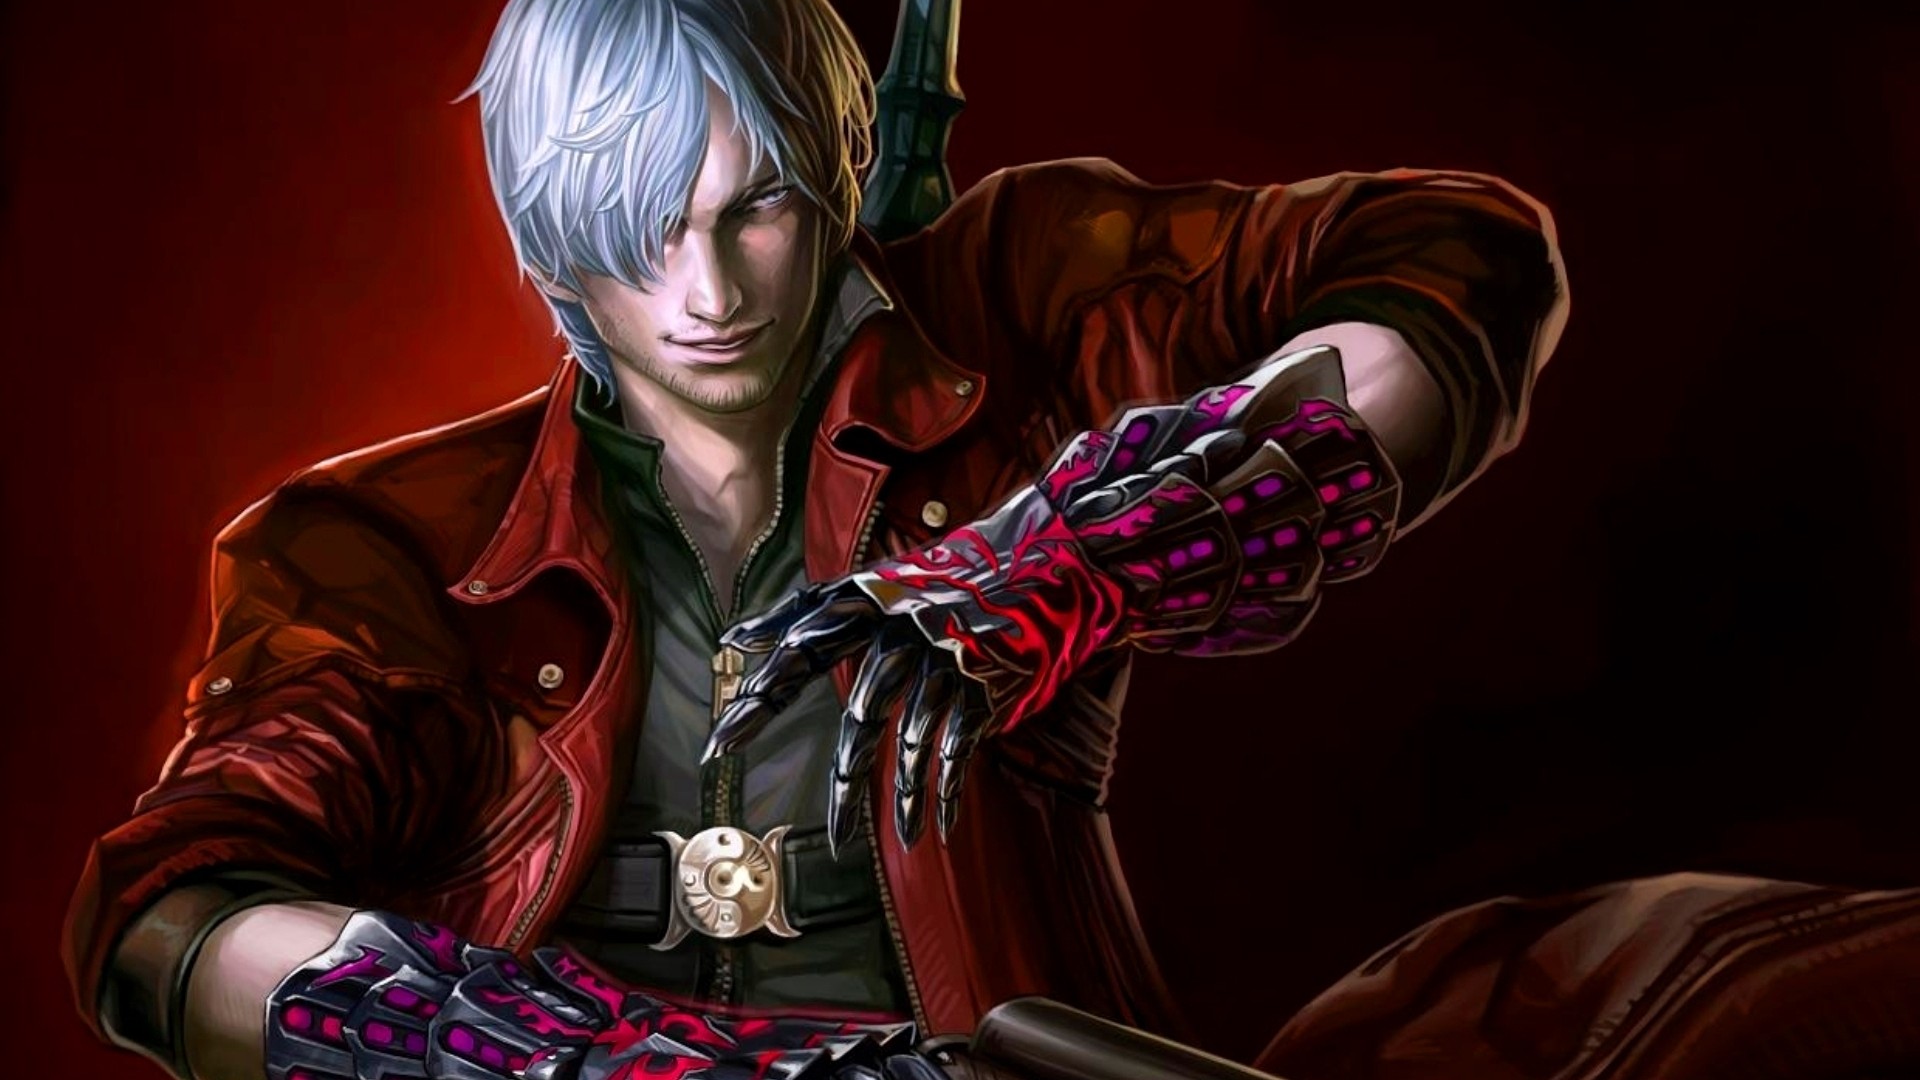 1920x1080 Devil May Cry 5 Wallpaper